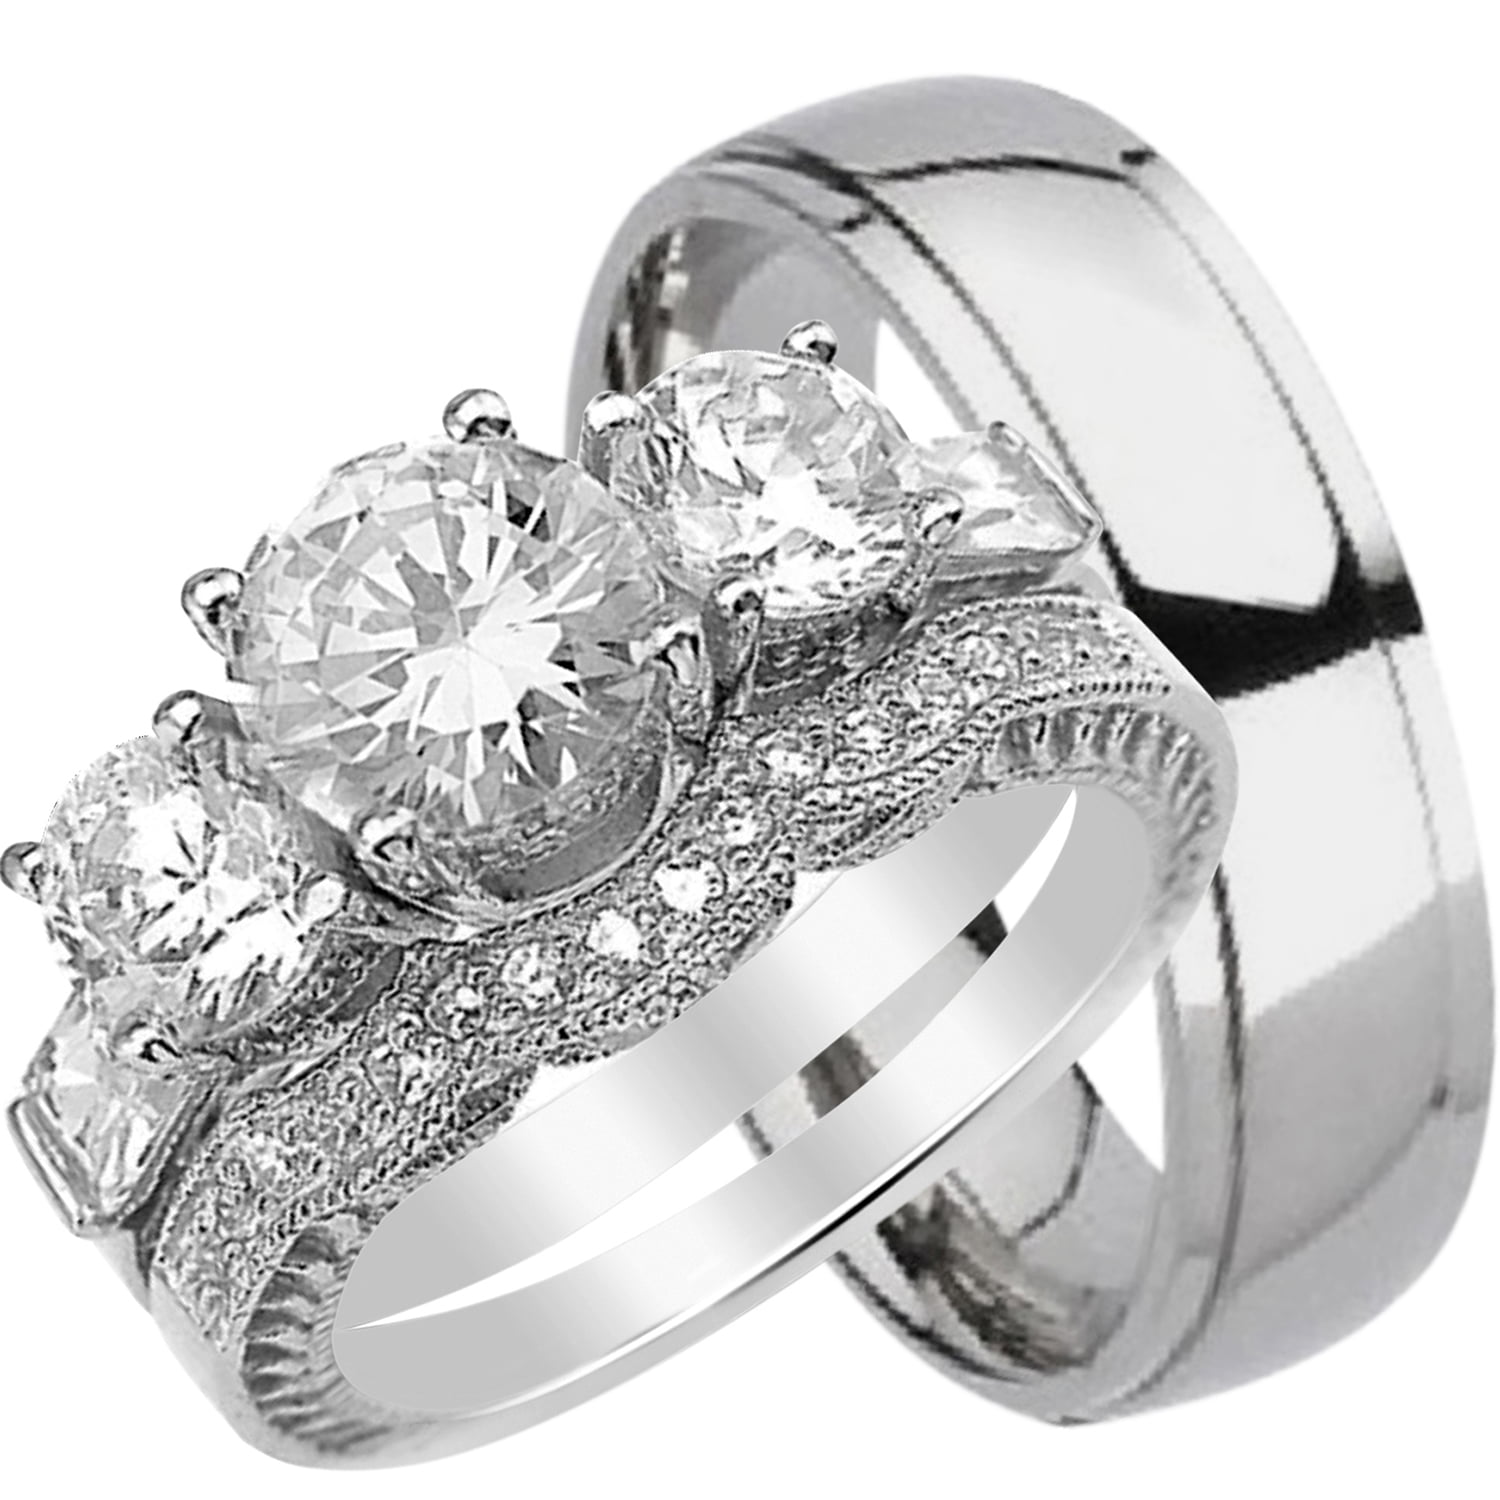 4 Pcs Her Sterling Silver Heart CZ His Titanium Engagement Wedding Ring Band Set